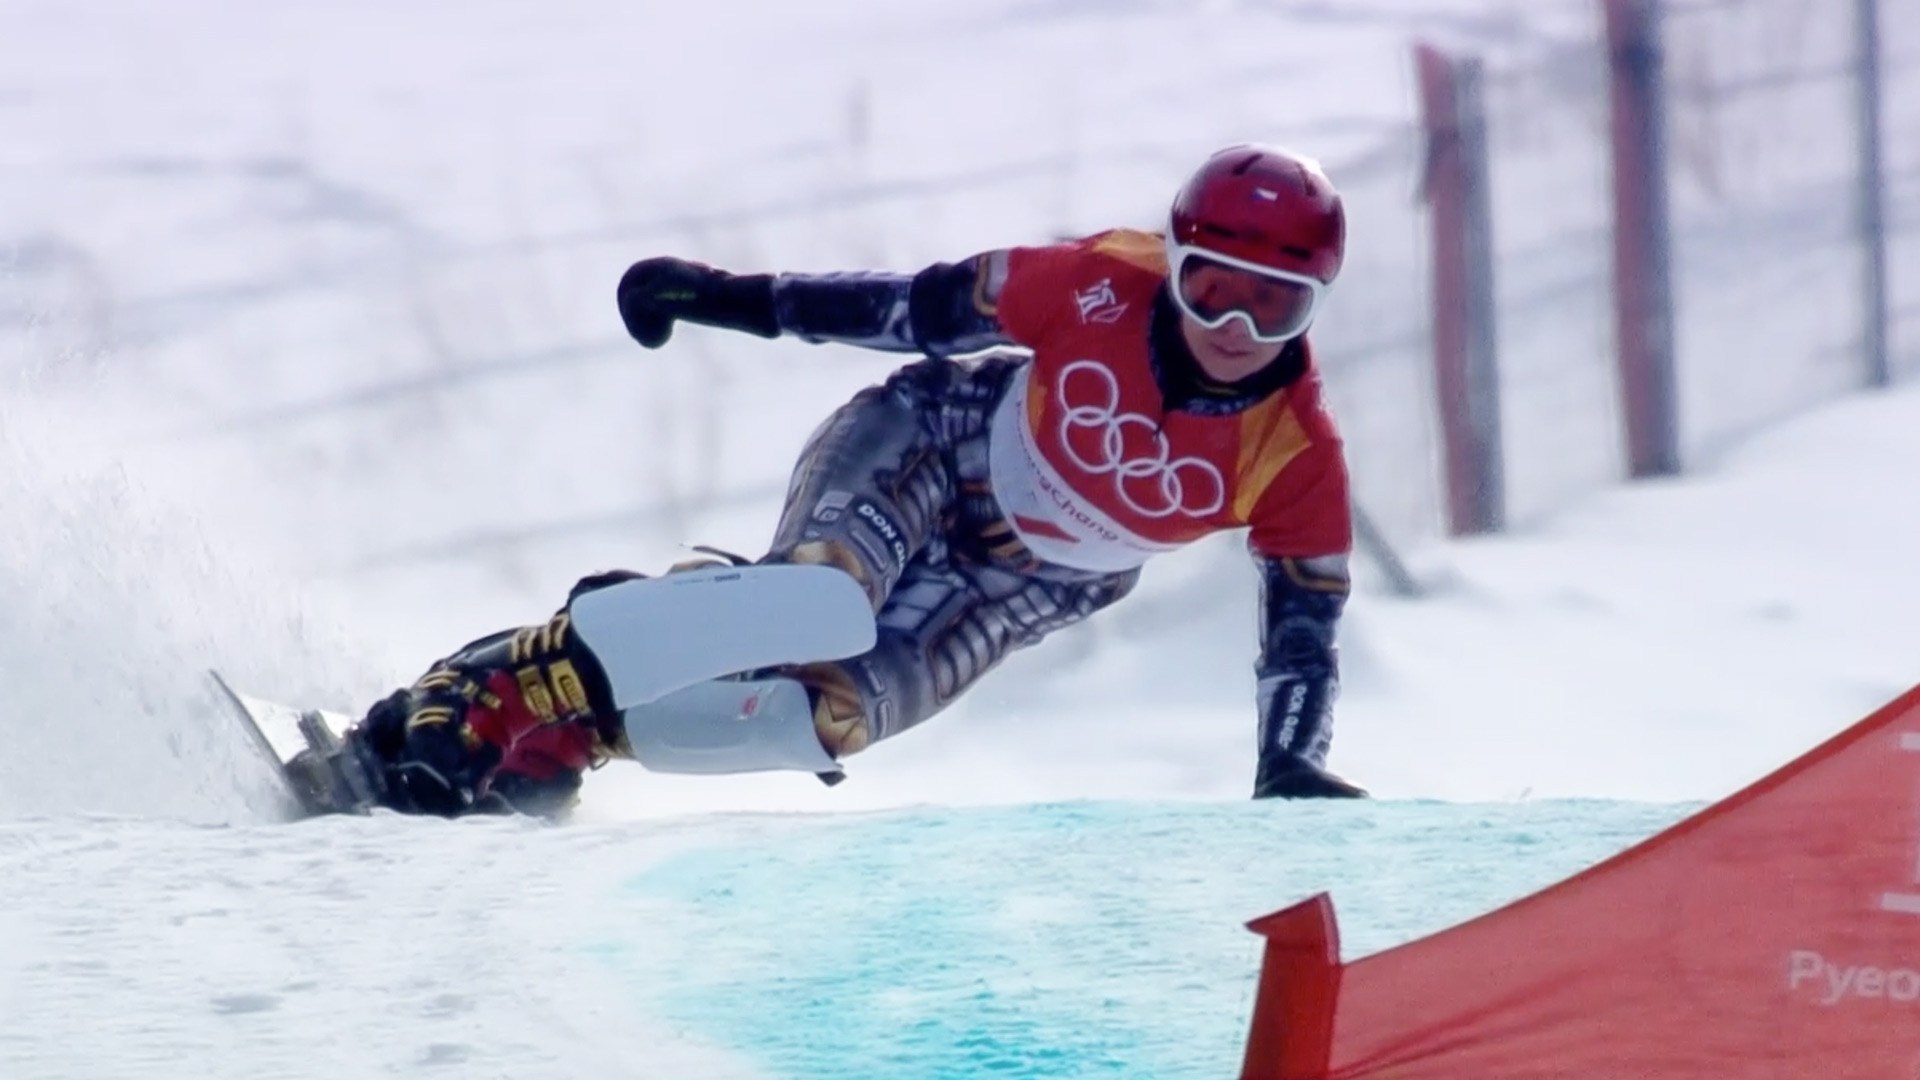 Ester Ledecka Wins Gold In Snowboarding And Skiing At Winter